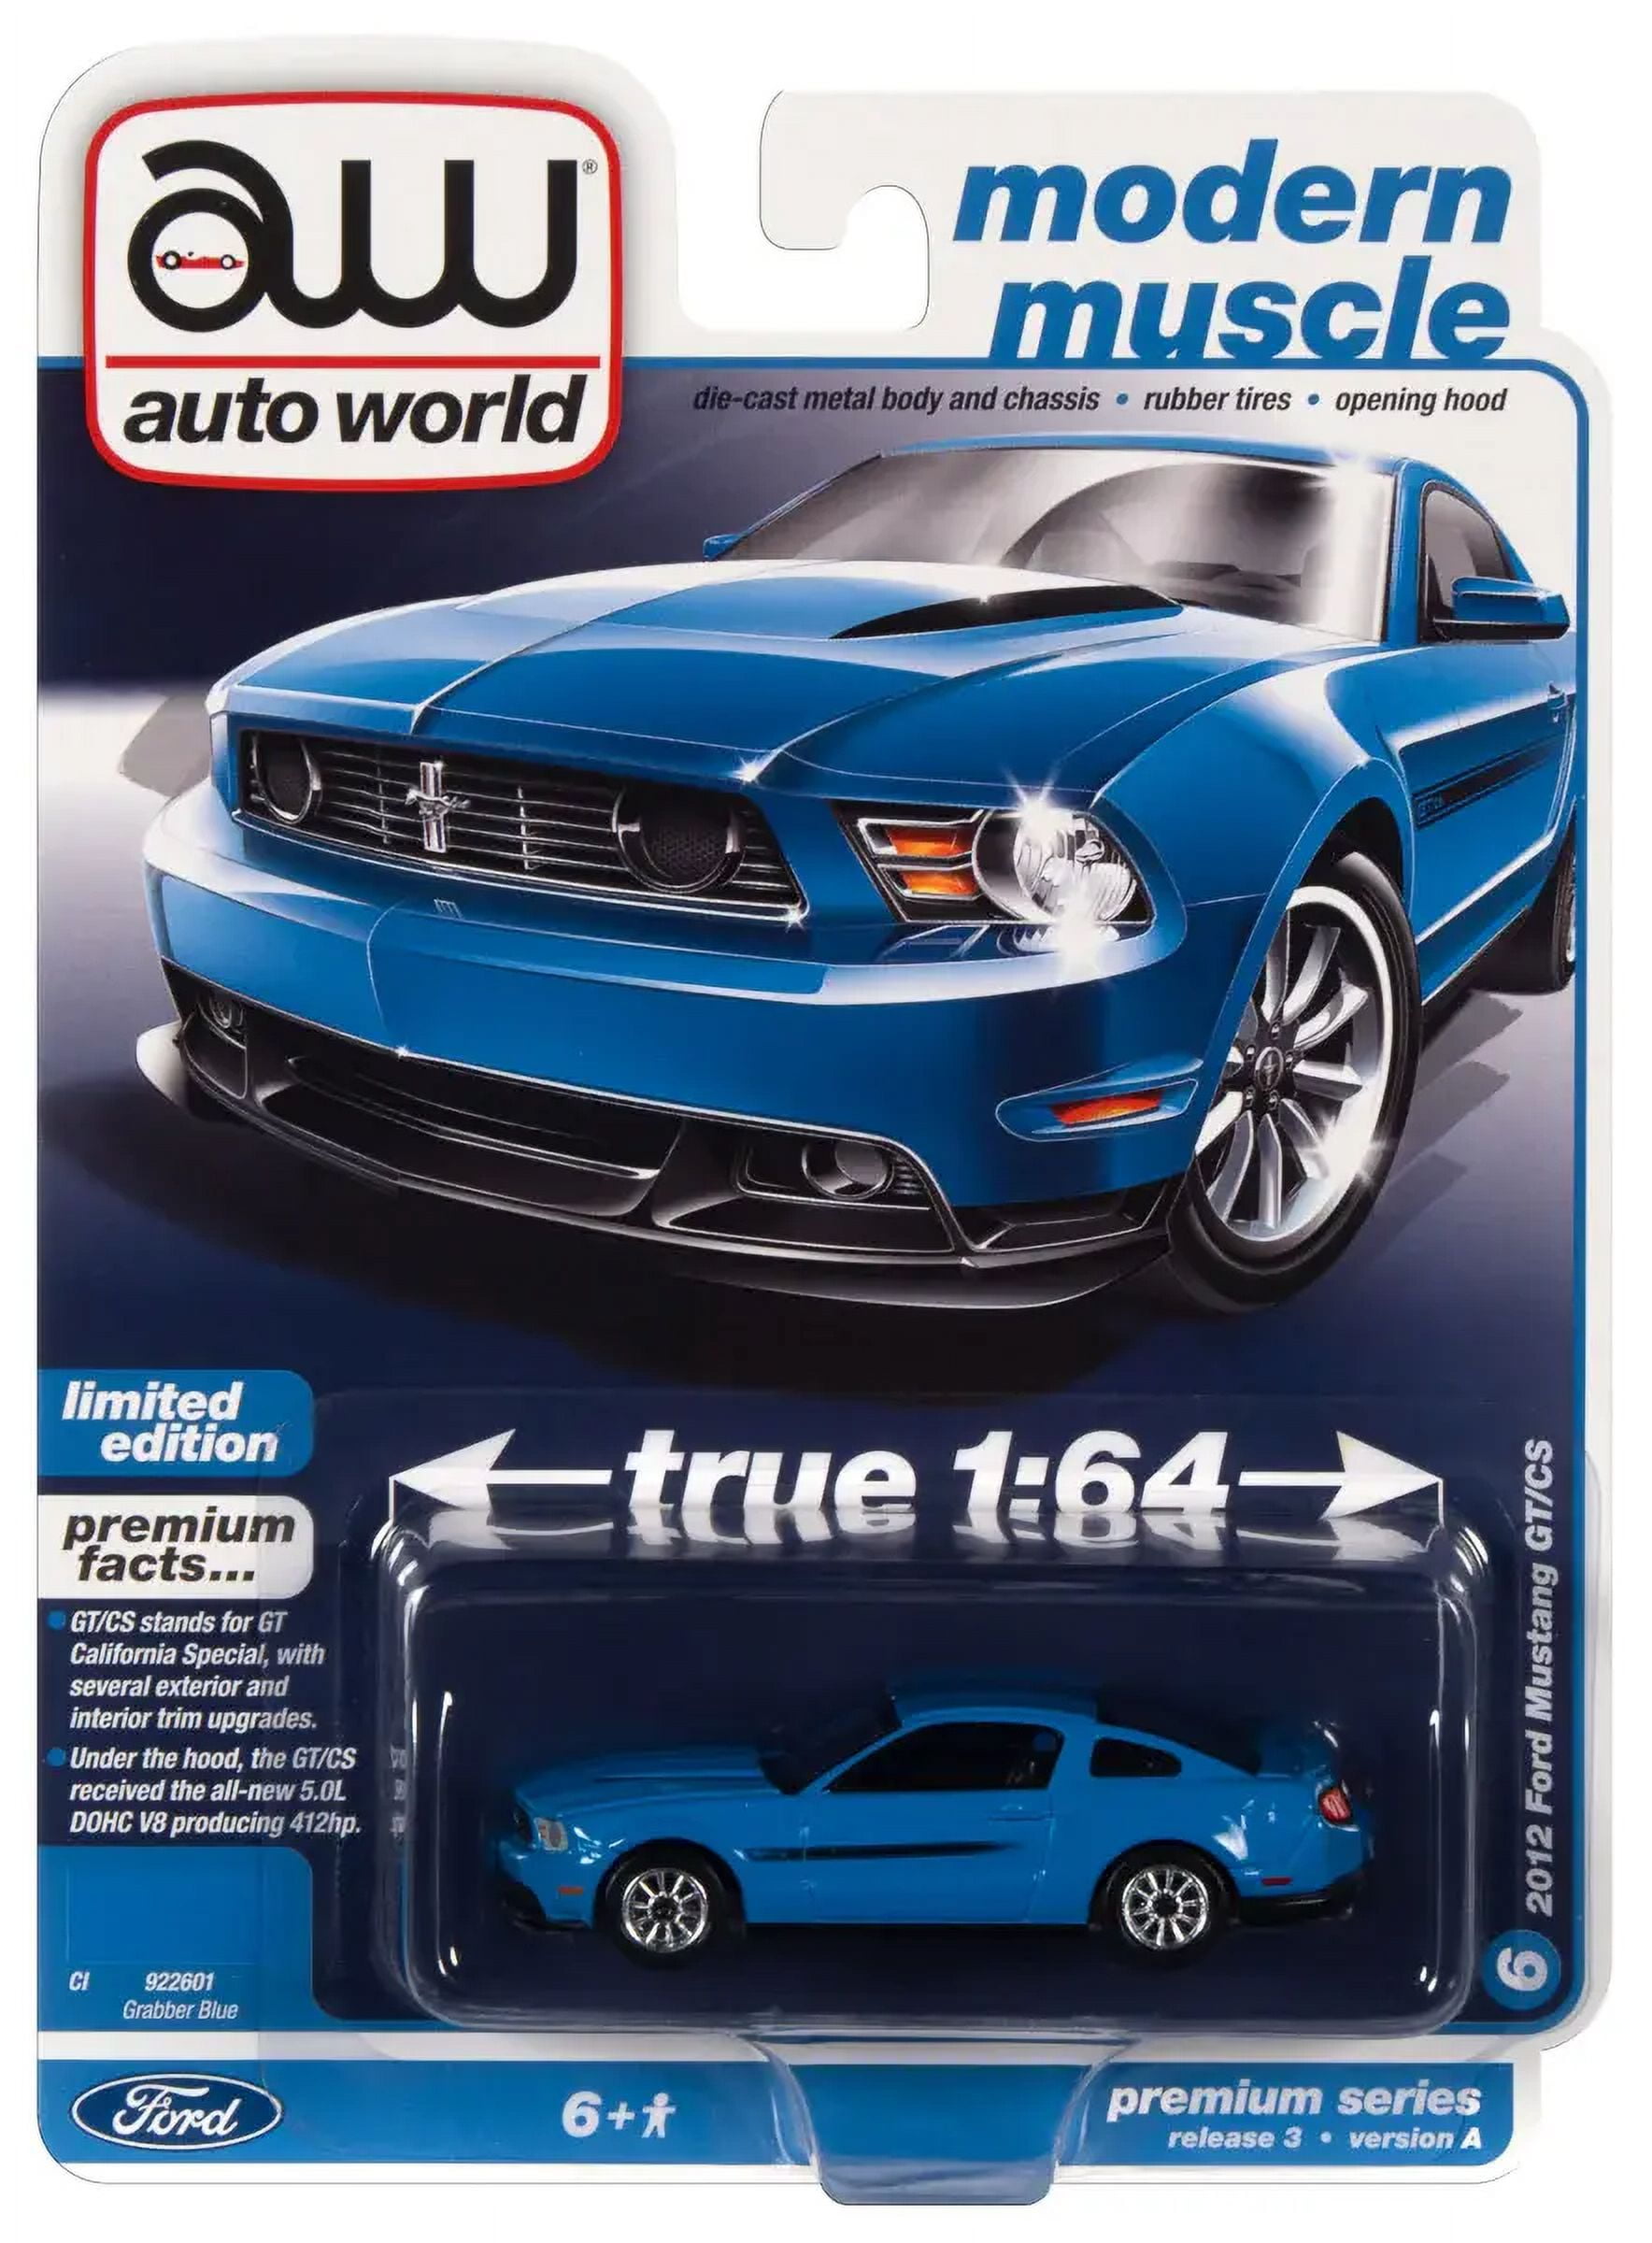 2012 Ford Mustang GT-CS Grabber Blue with Black Stripes Modern Muscle Limited Edition 1-64 Diecast Model Car -  Grizzly Fitness, BE2959333